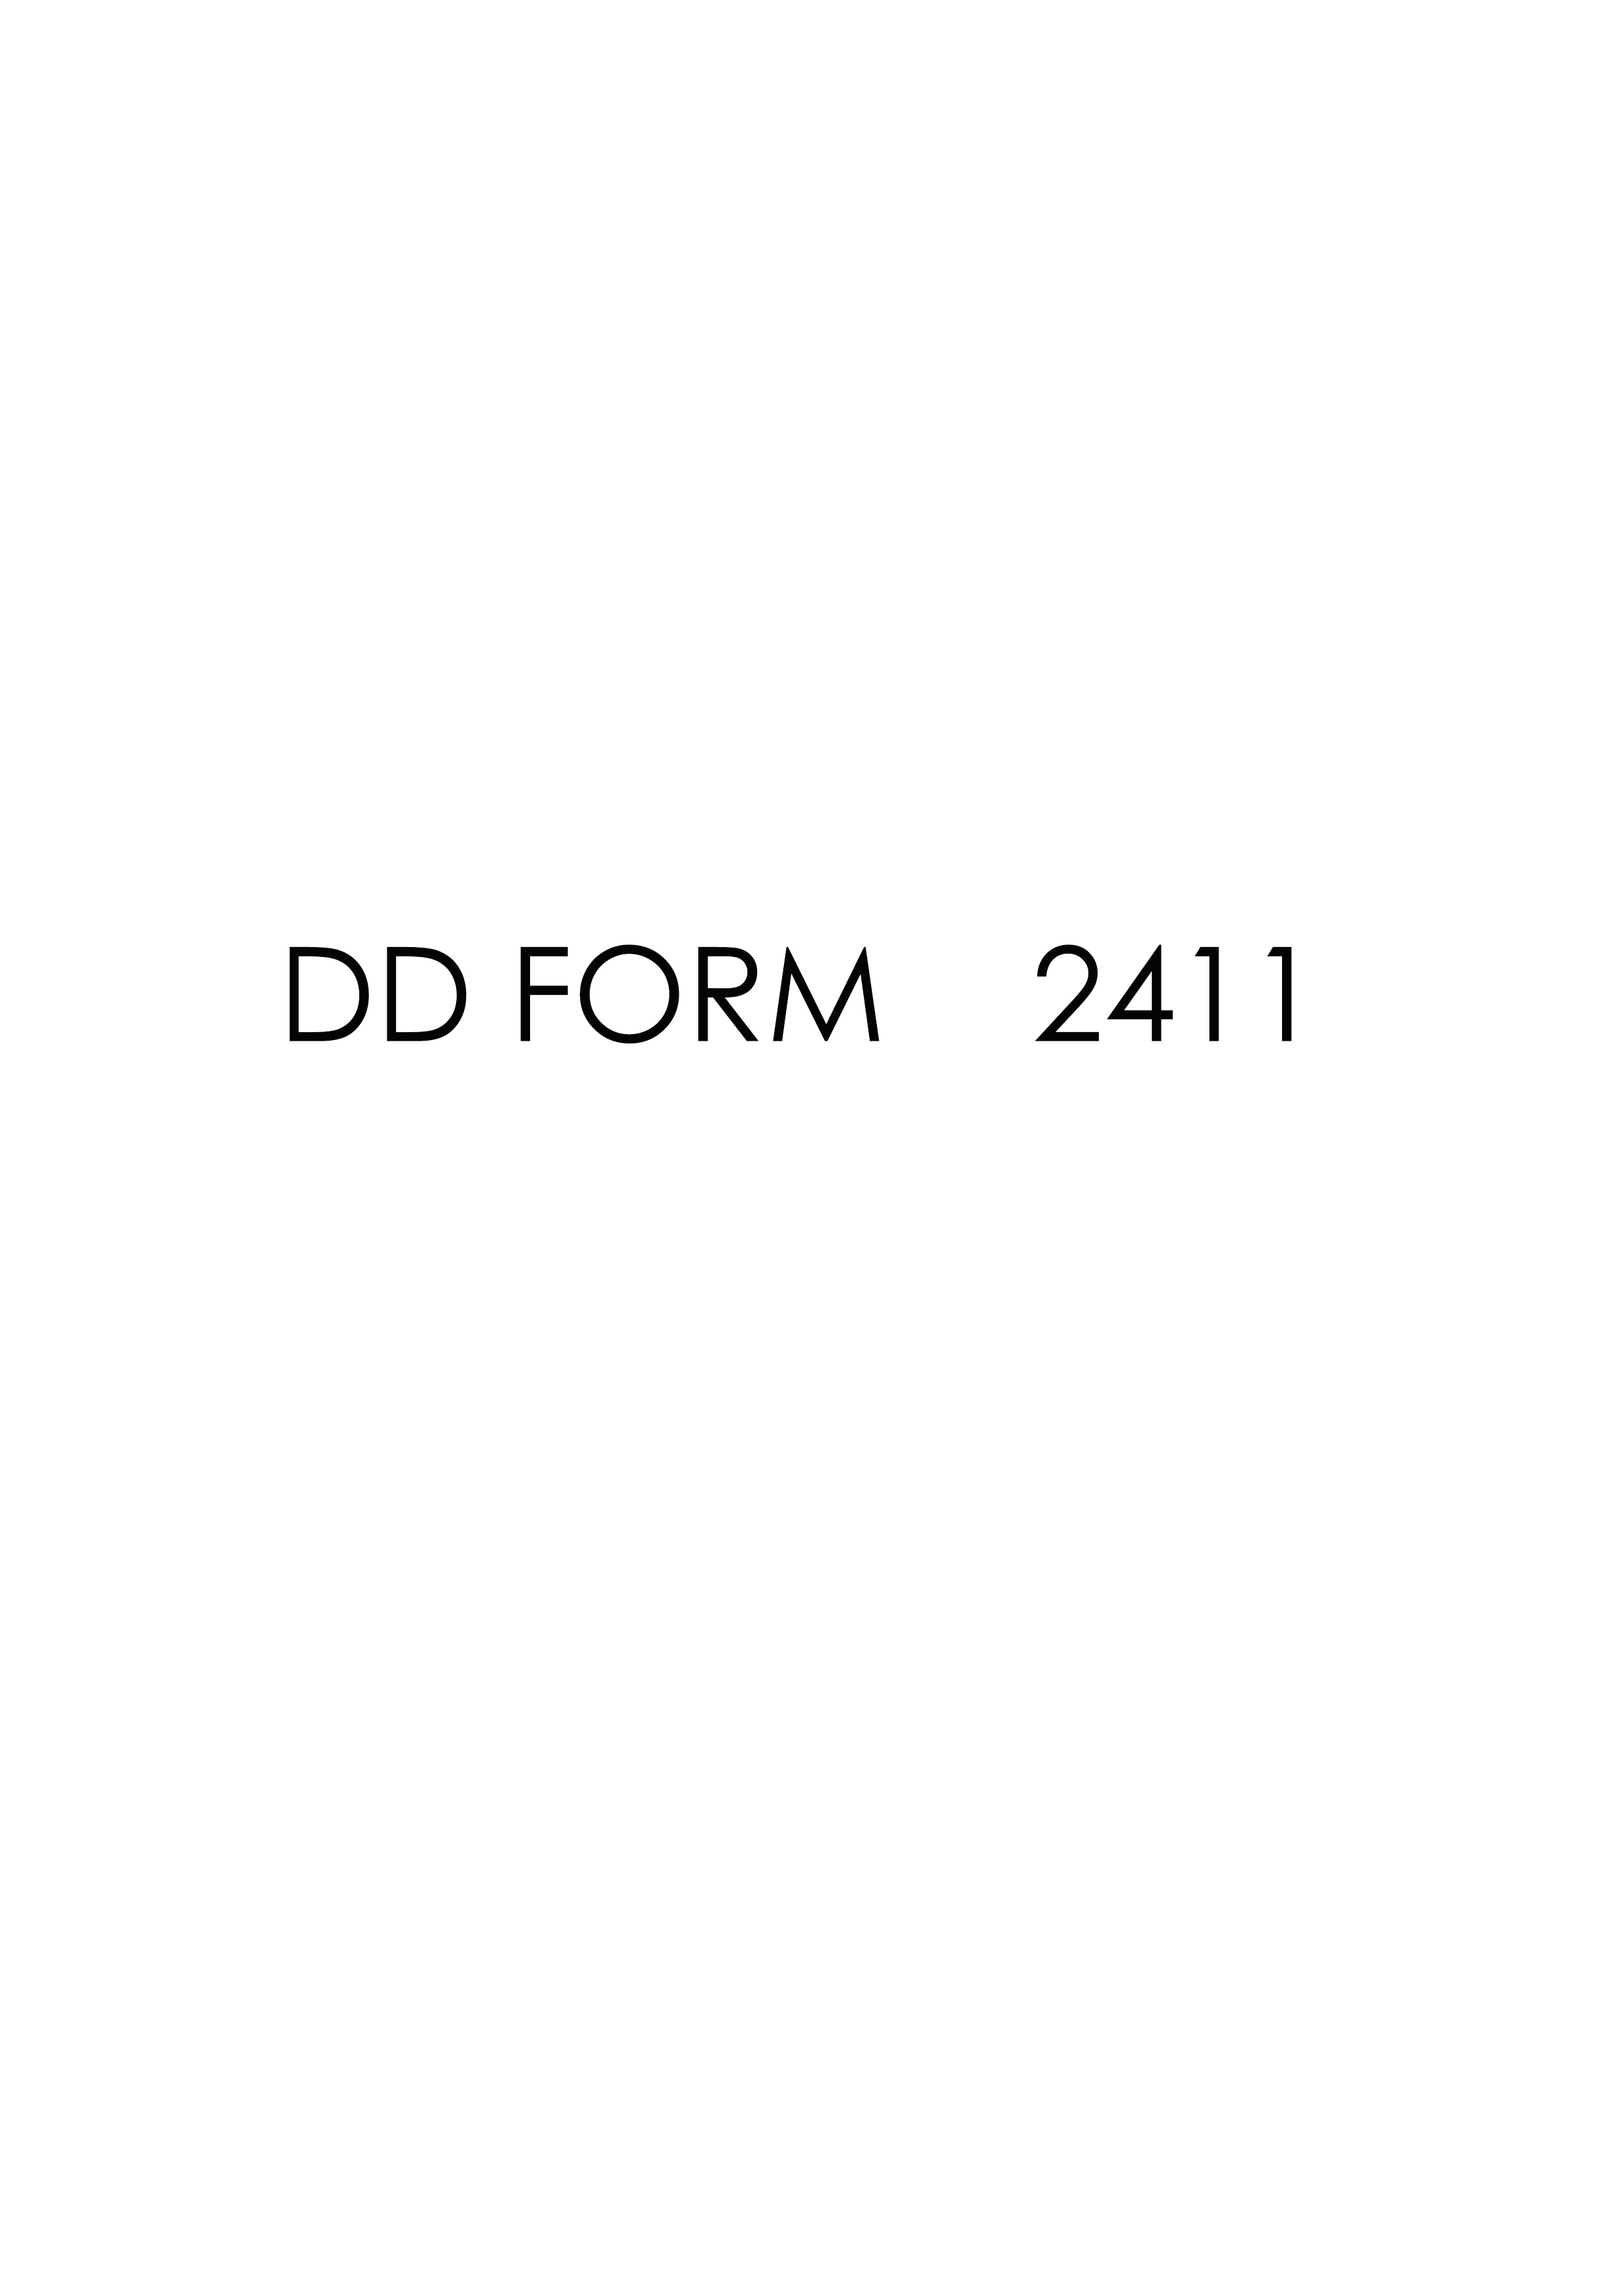 Download Fillable dd Form 2411